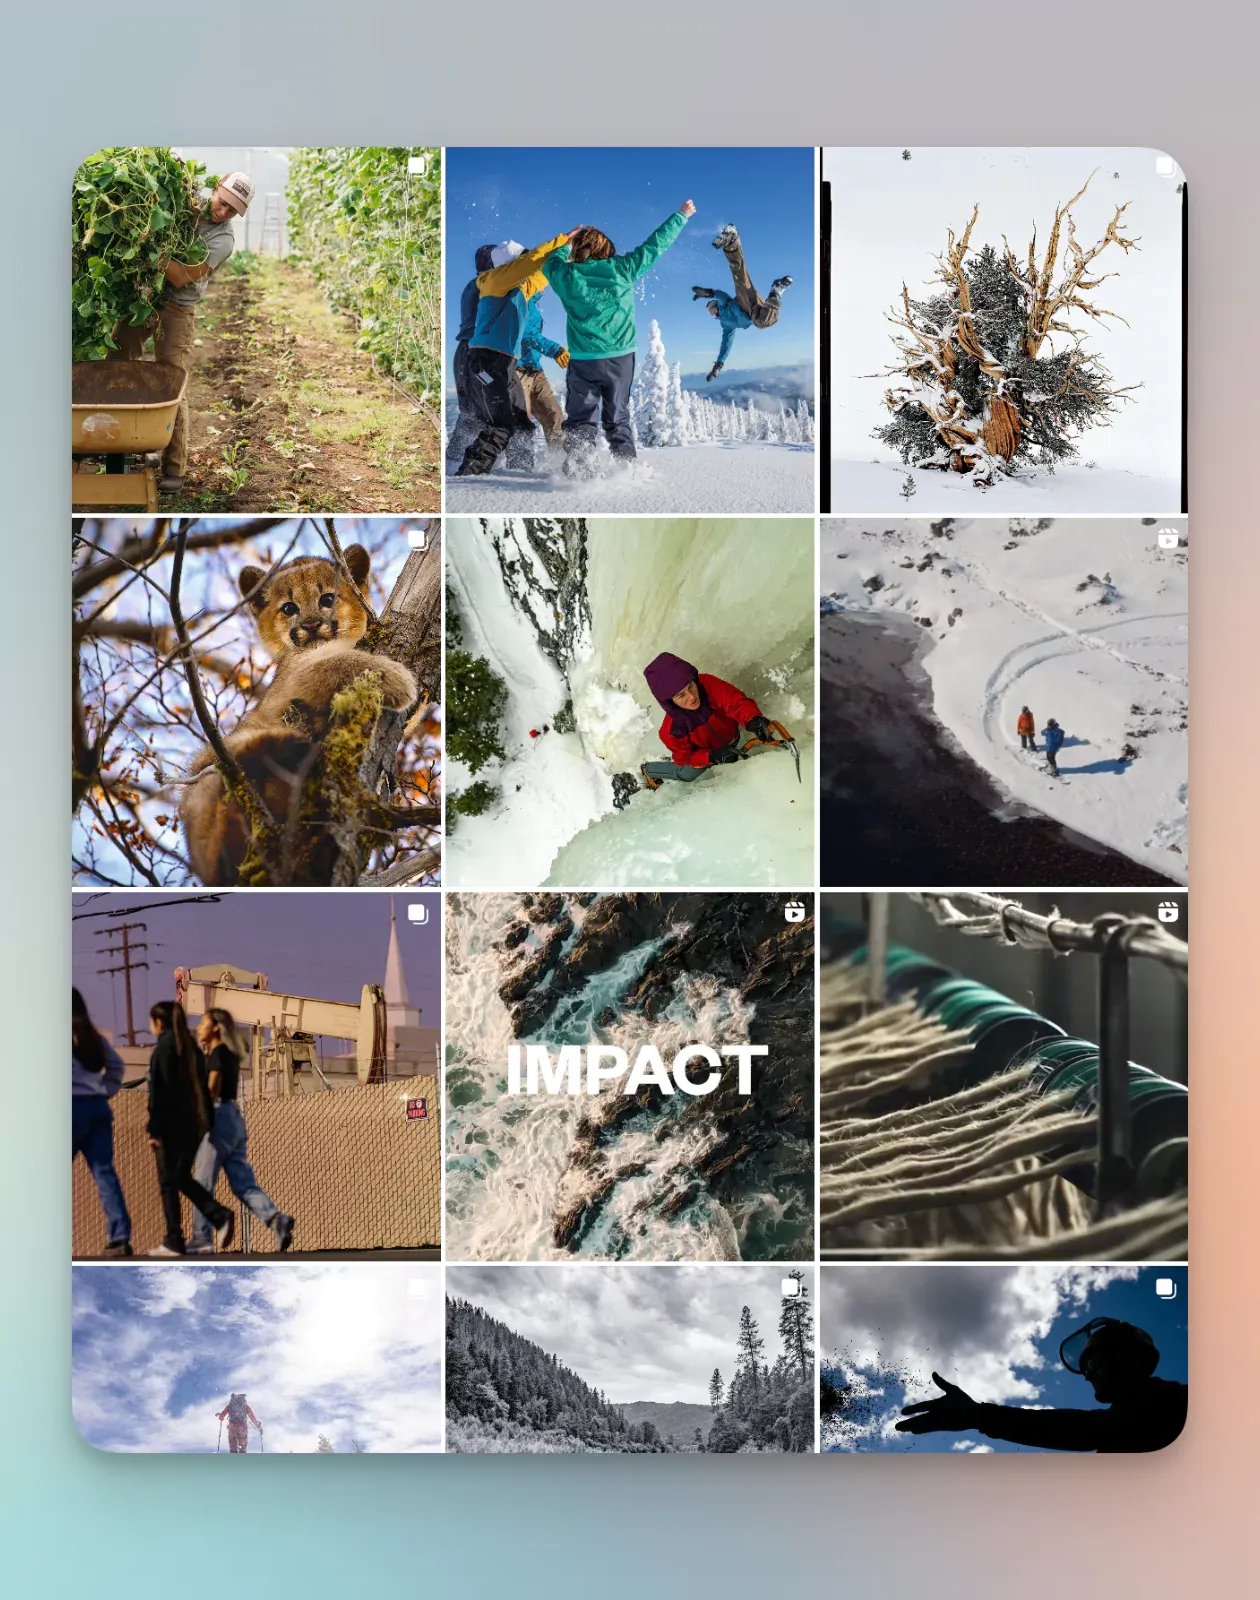 Here is a screenshot displaying Patagonia's Instagram feed that portrays its main social media content pillars